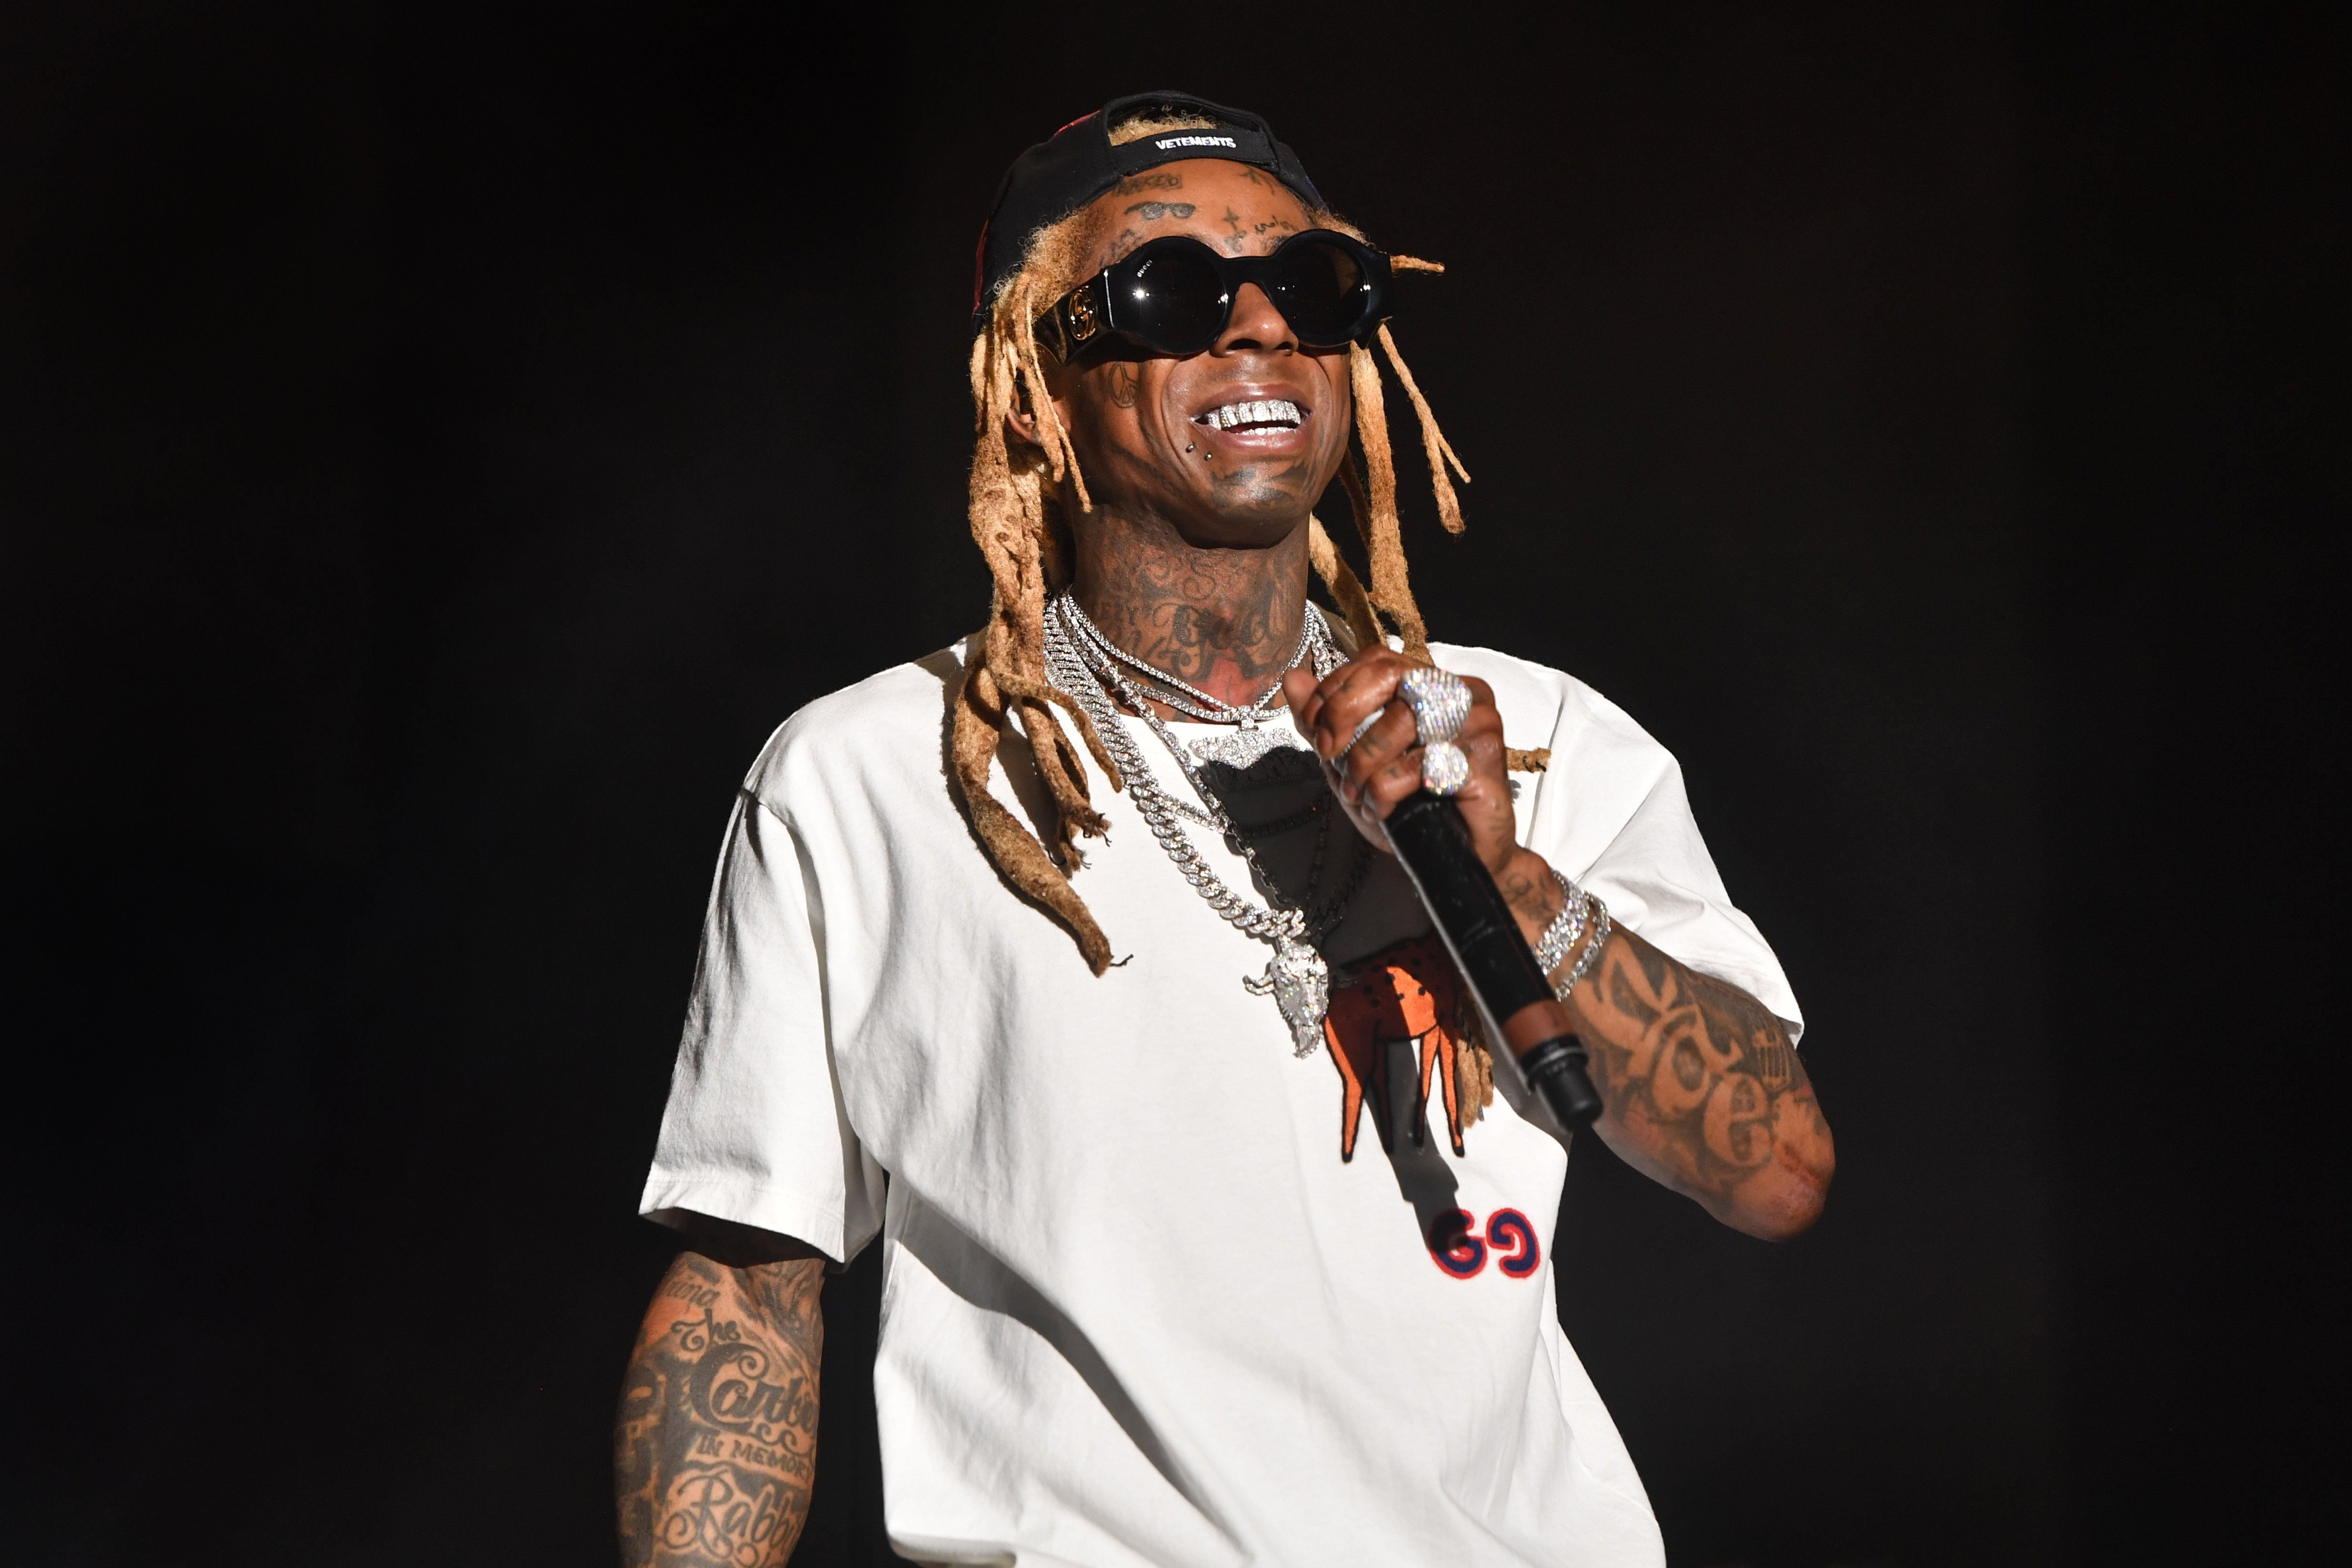 Lil Wayne performs during Lil Weezyana 2019 at UNO Lakefront Arena on September 07, 2019 | Photo: Getty images